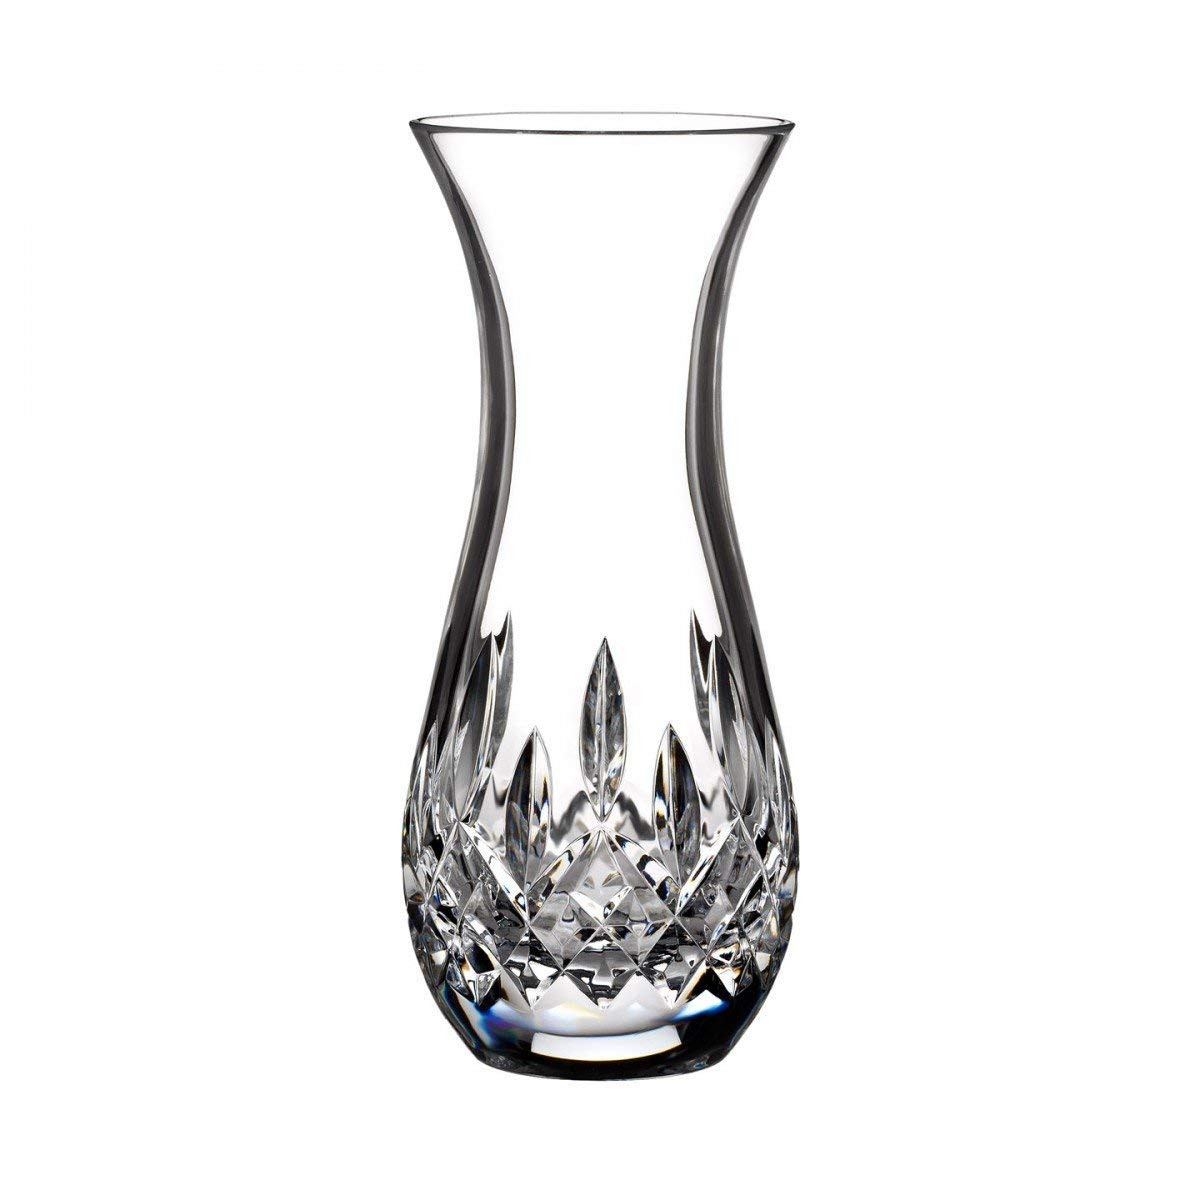 27 Trendy Waterford Giftology Lismore Candy Bud Vase 2024 free download waterford giftology lismore candy bud vase of amazon com waterford lismore sugar 6 bud vase home kitchen regarding 61rs3a6kkml sl1200